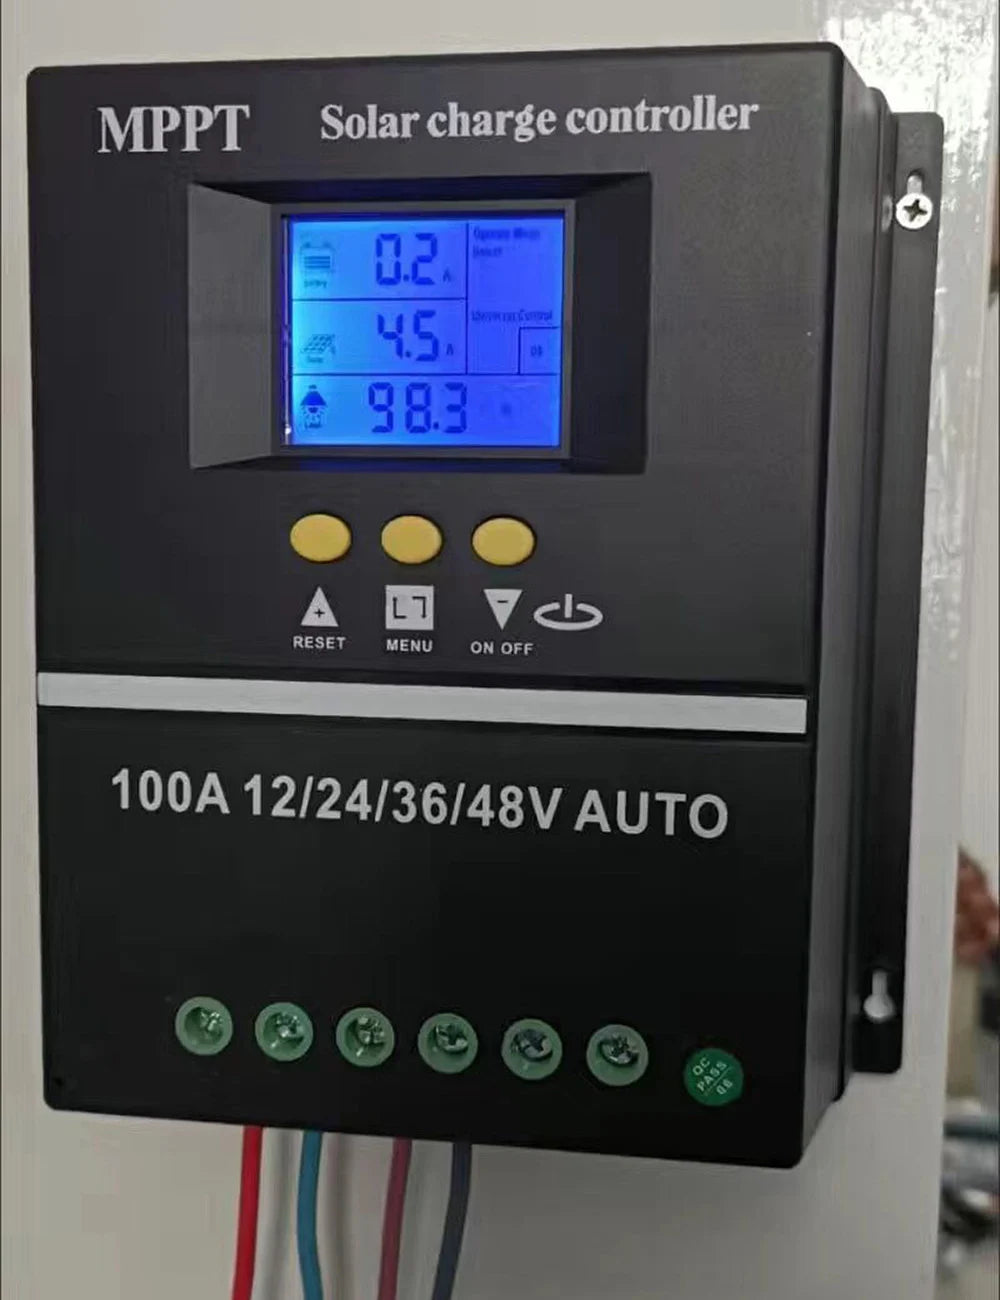 100A 80A 60A MPPT Solar Charge Controller, Solar charge controller with LCD display, supports 12V to 48V, 100A capacity, and MPPT technology.